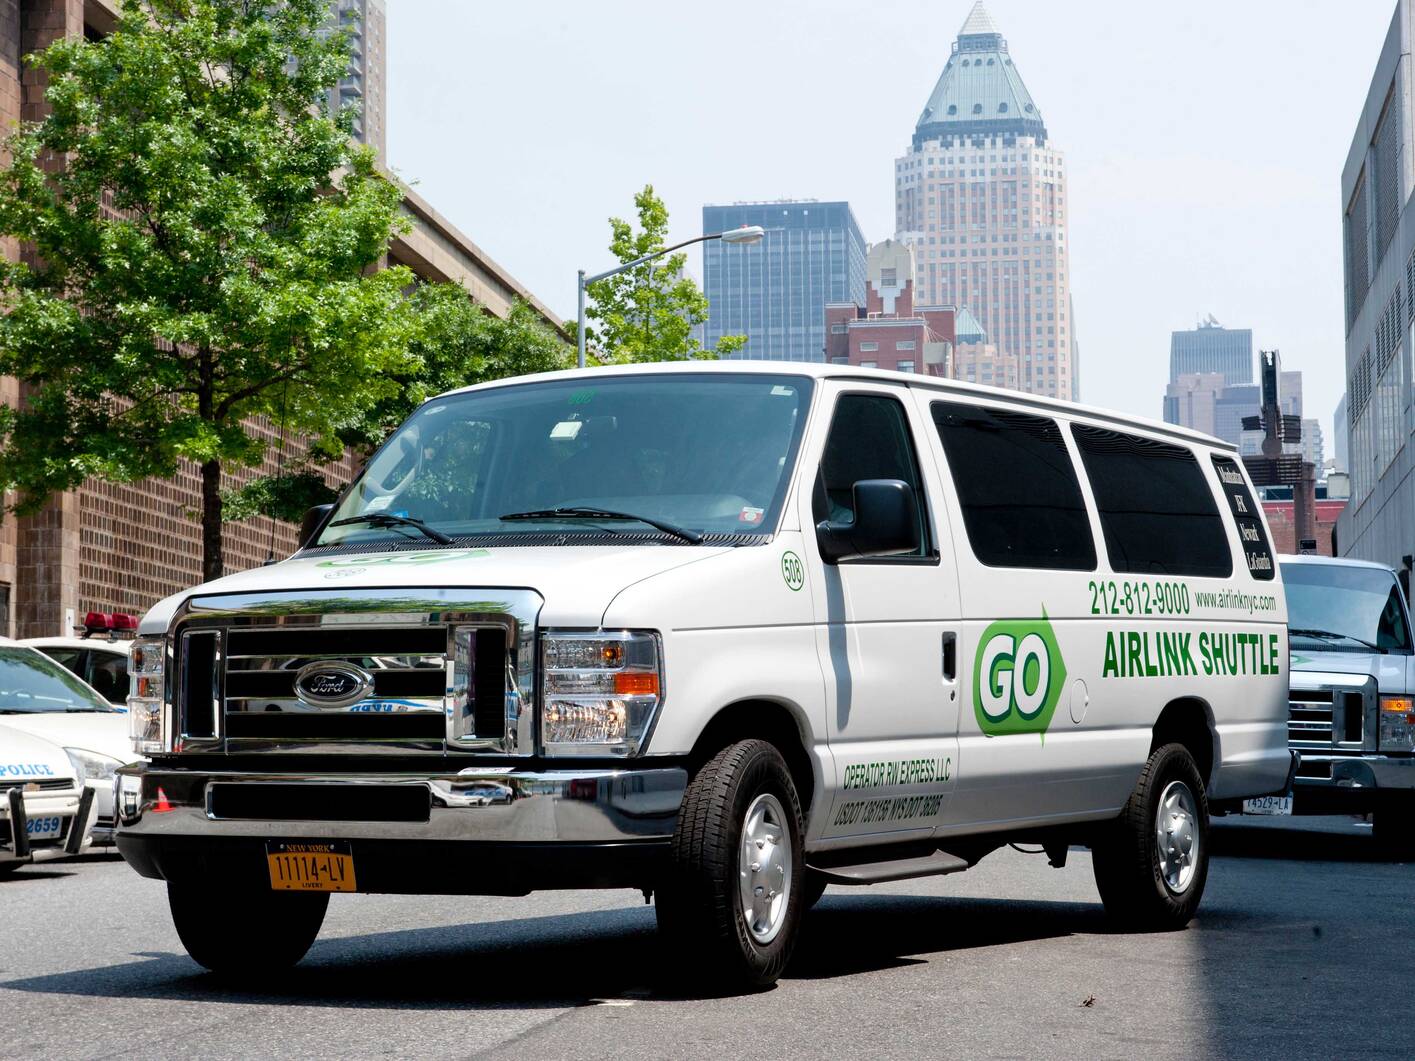 Airlink shuttle, nyc airport transportation